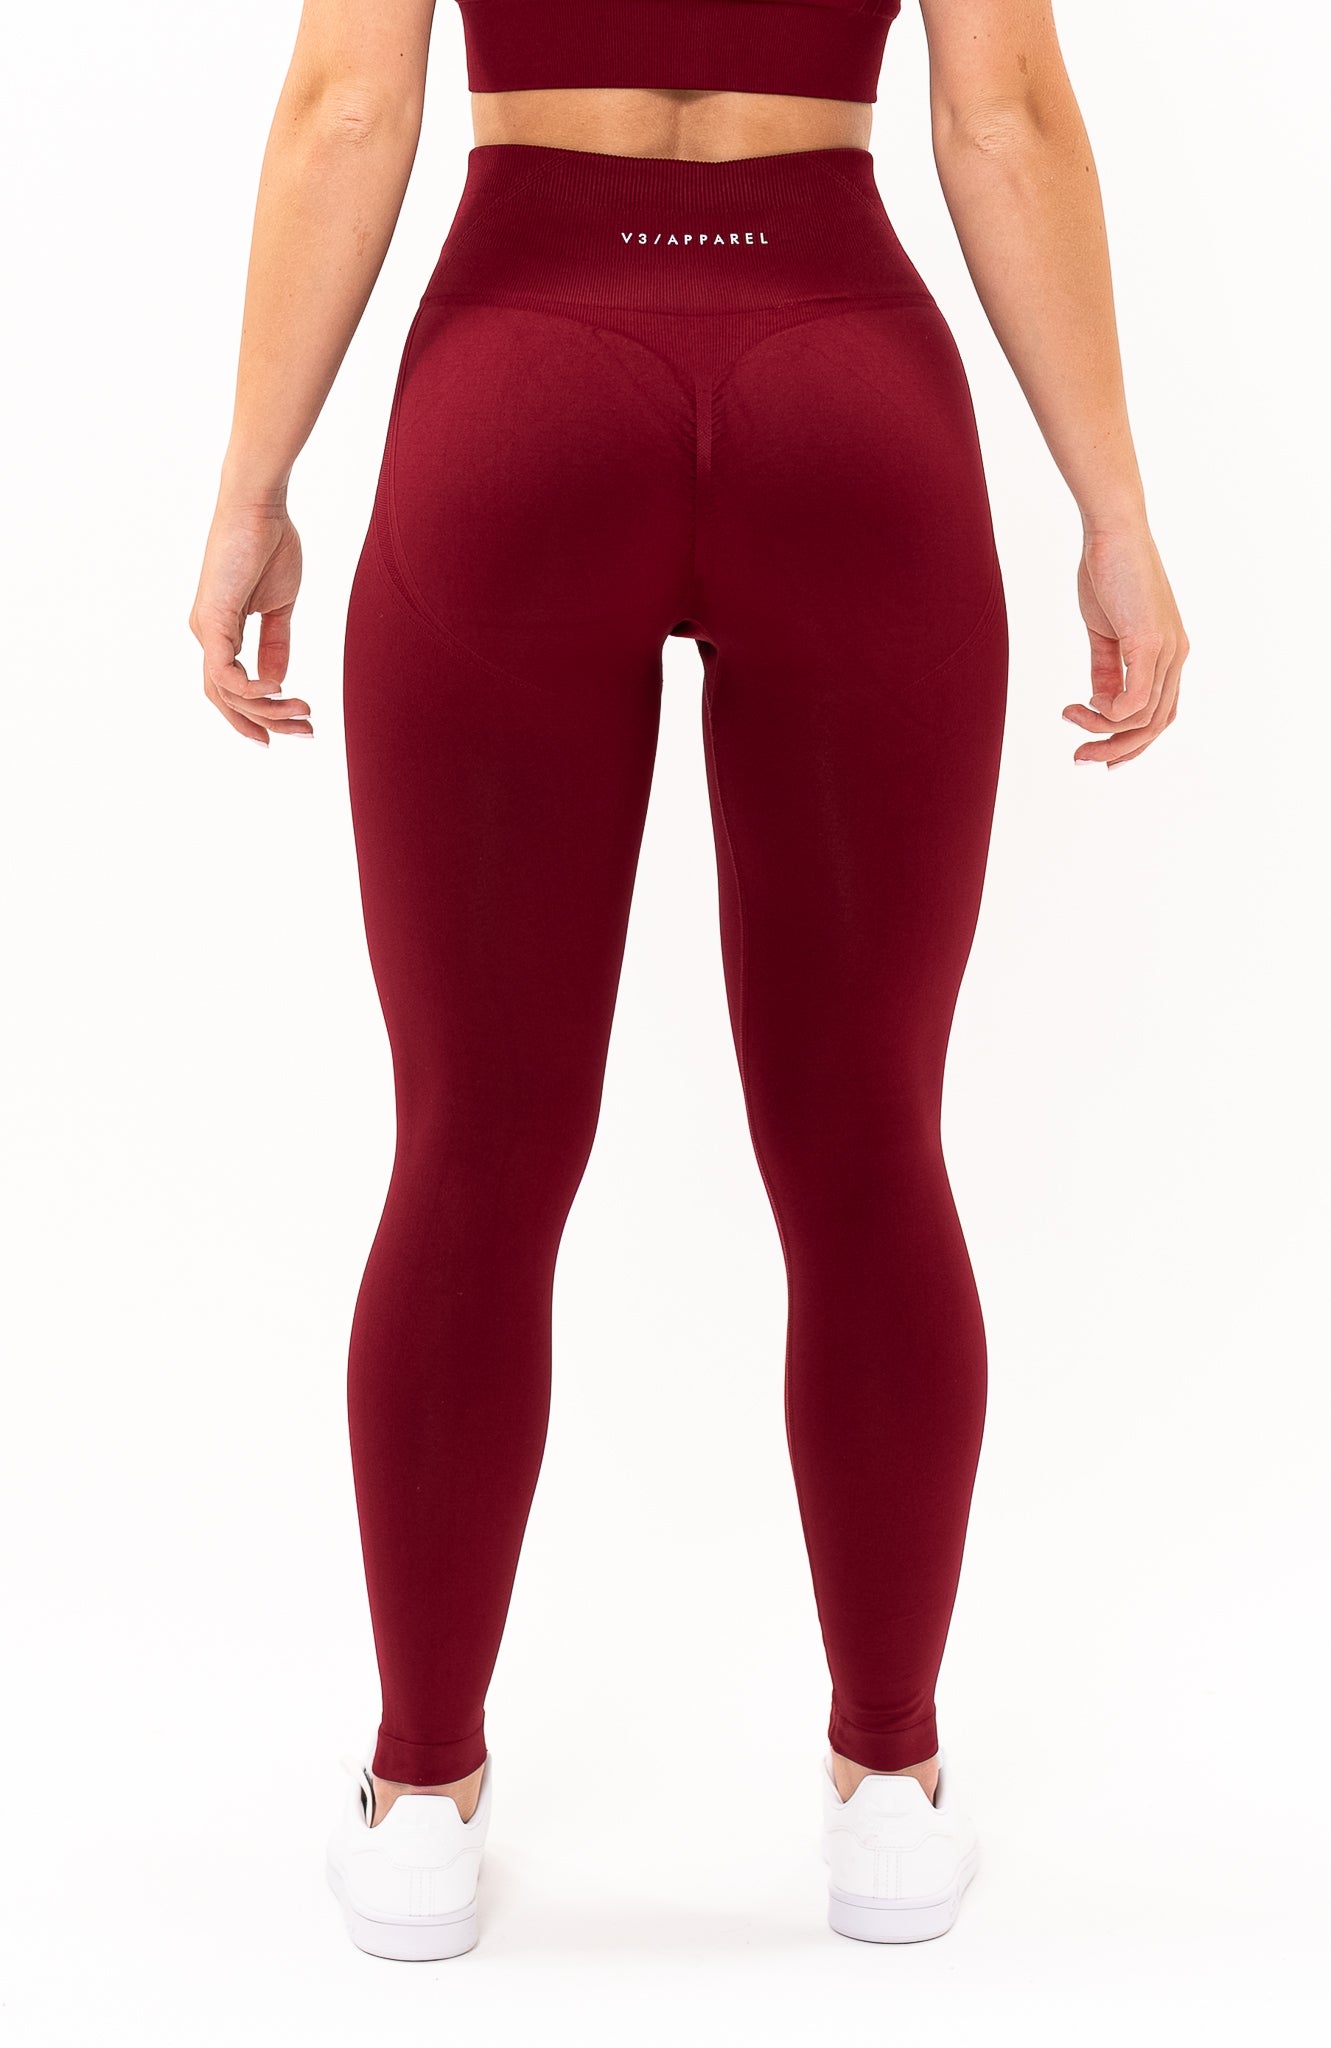 redbaysand Women's Tempo seamless scrunch bum shaping high waisted leggings in burgundy red – Squat proof sports tights for Gym workouts training, Running, yoga, bodybuilding and bikini fitness.